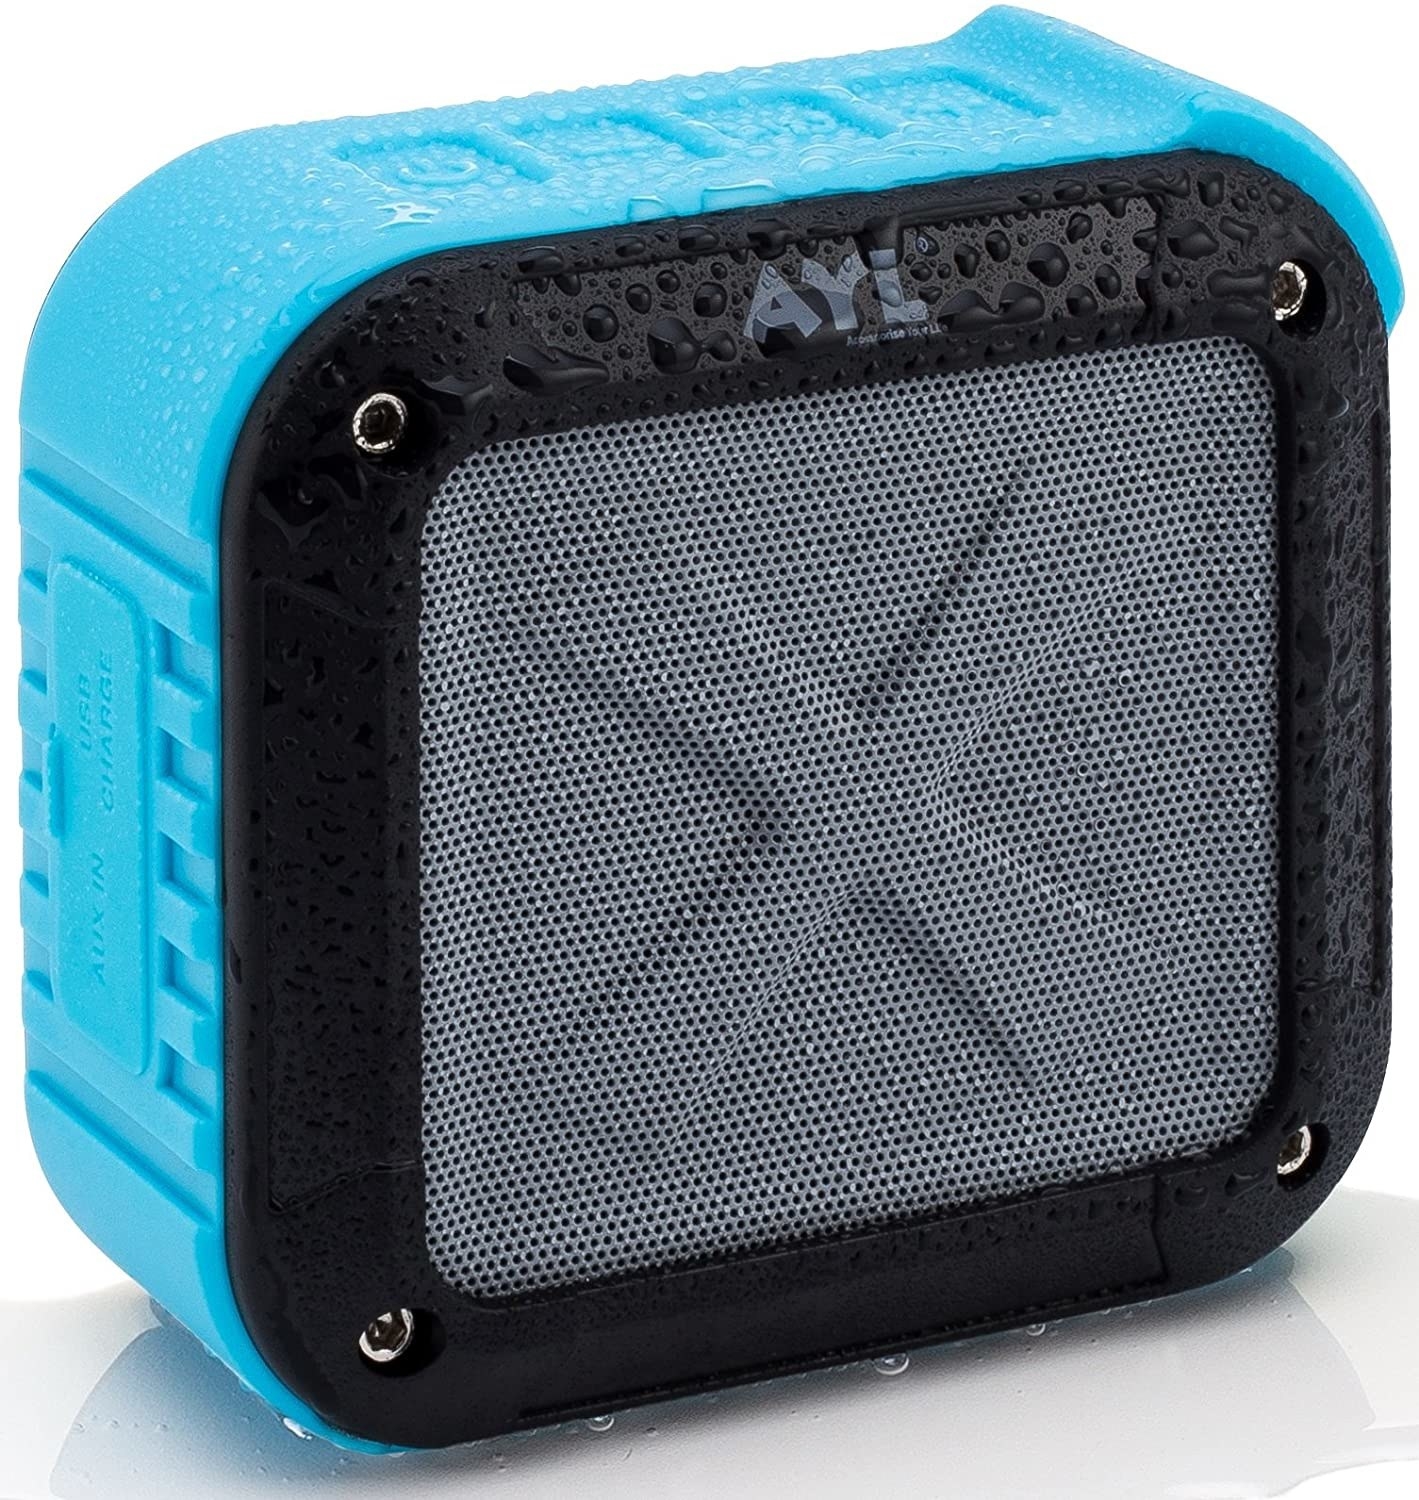 The Soundfit portable outdoor waterproof bluetooth speaker in blue